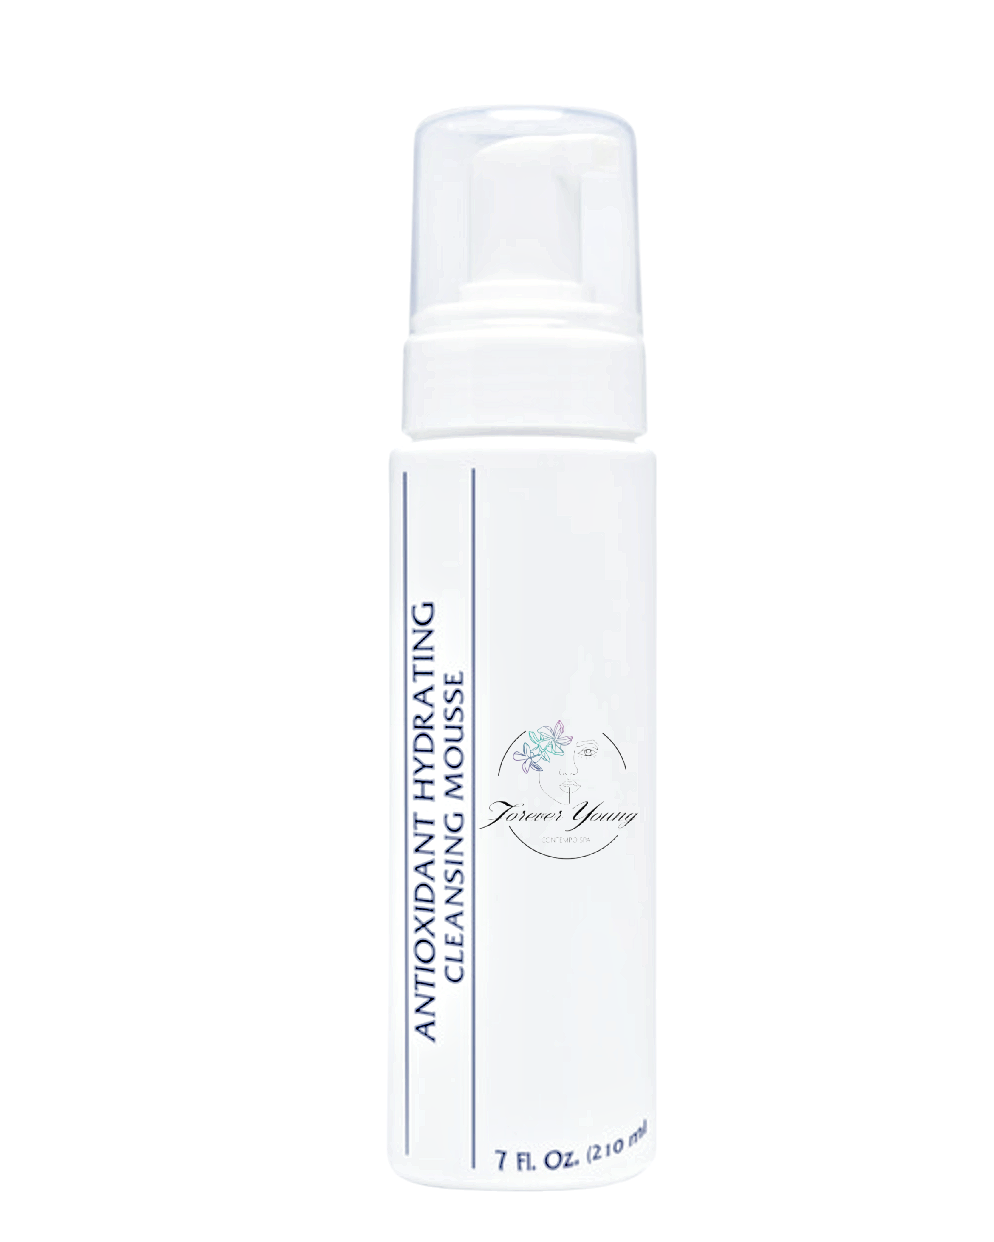 Antioxidant Hydrating Cleansing Mousse - Special Order